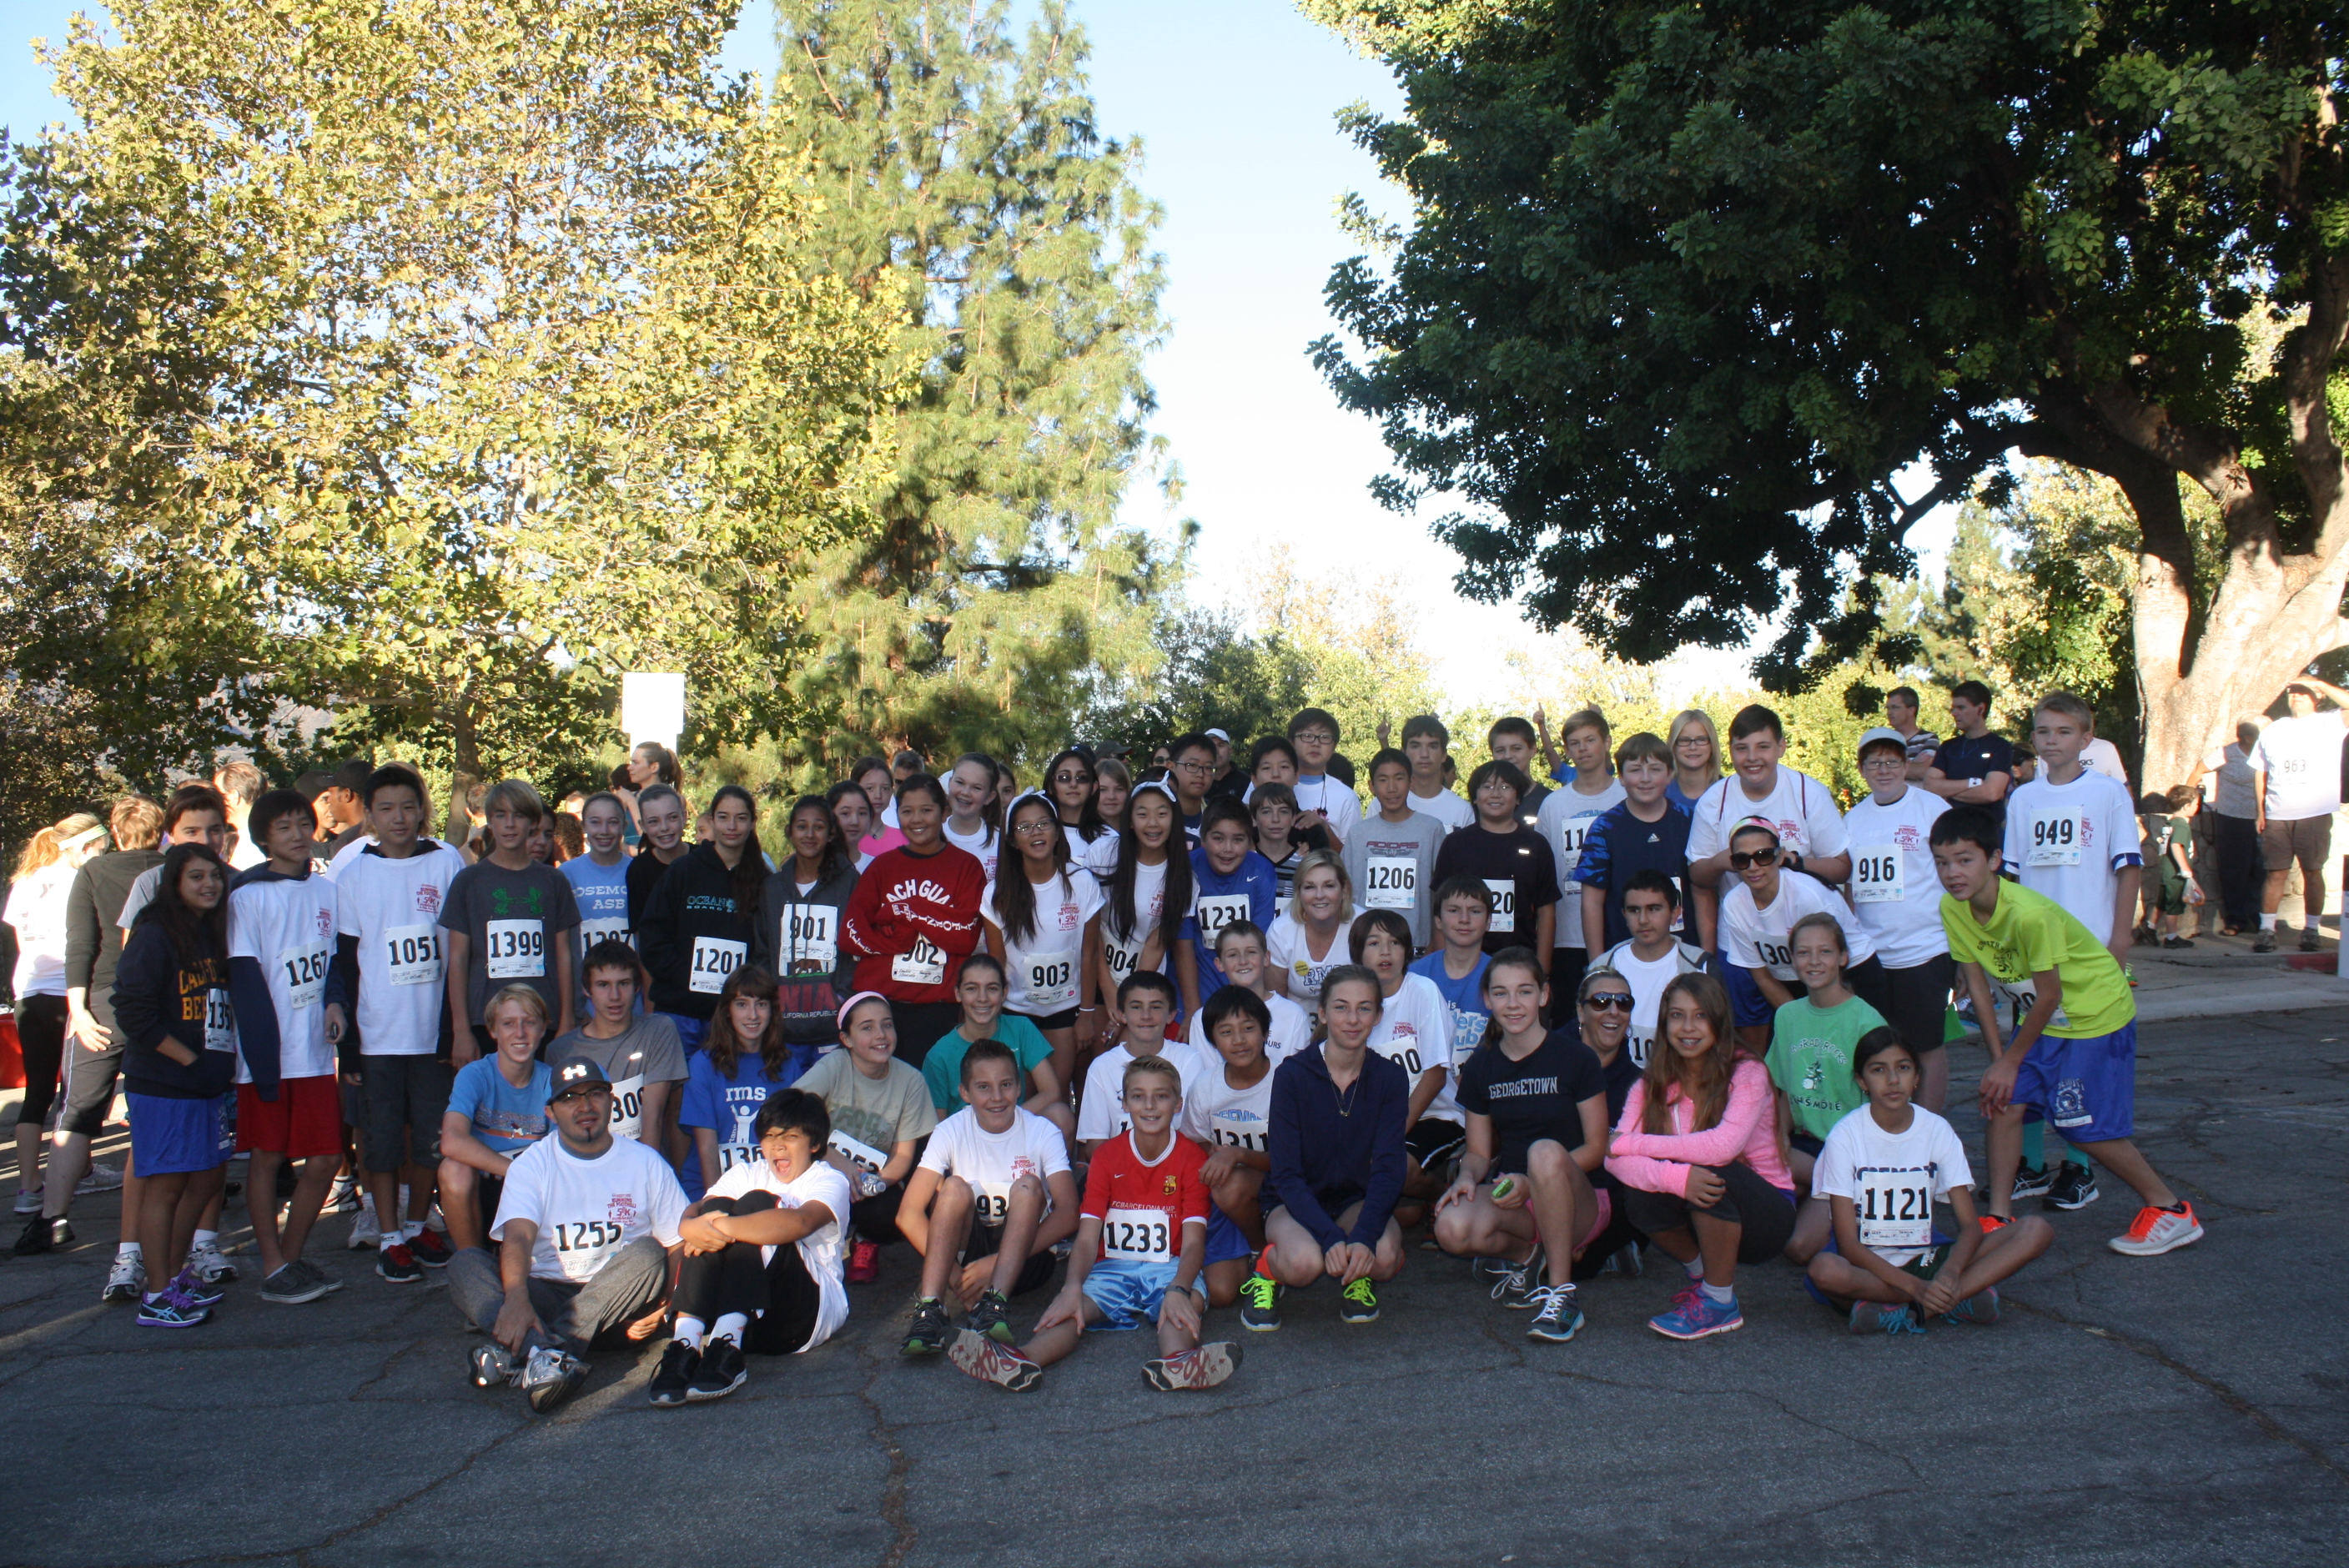 Chamber Hosts Annual 5K